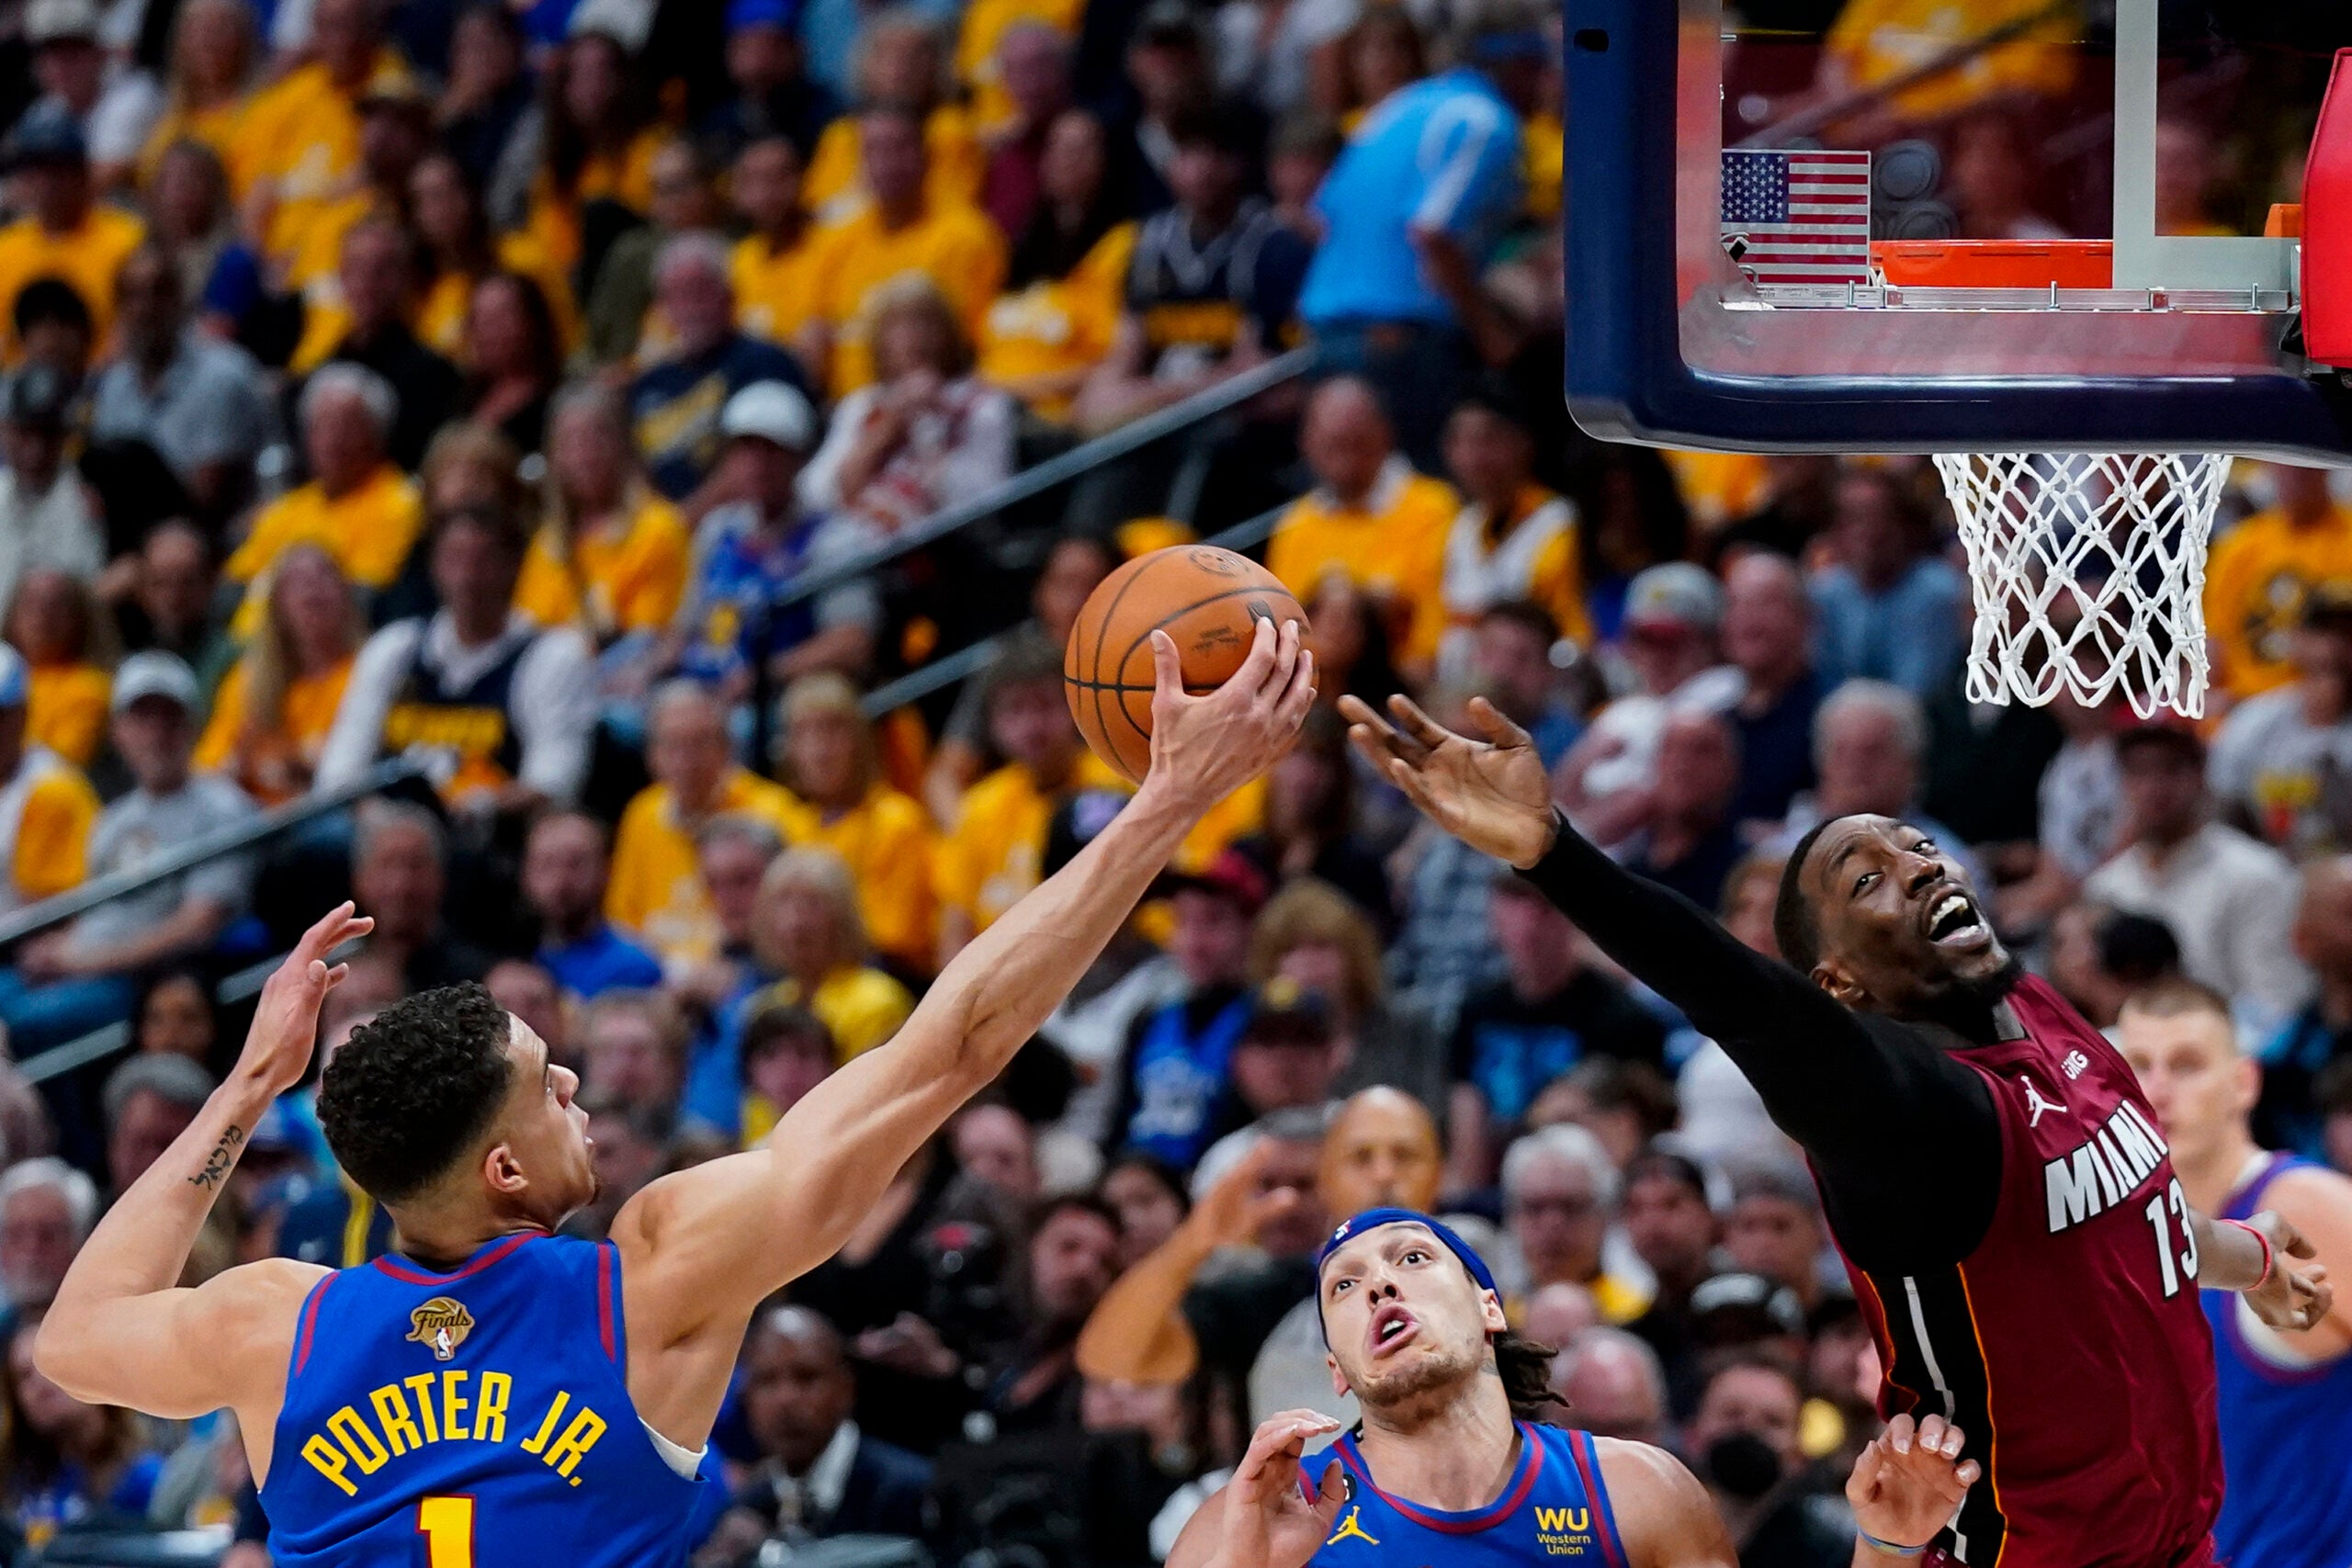 Denver Nuggets forward Michael Porter Jr., left, and Miami Heat center Bam Adebayo reach for the ball during the first half of Game 1 of basketball's NBA Finals.